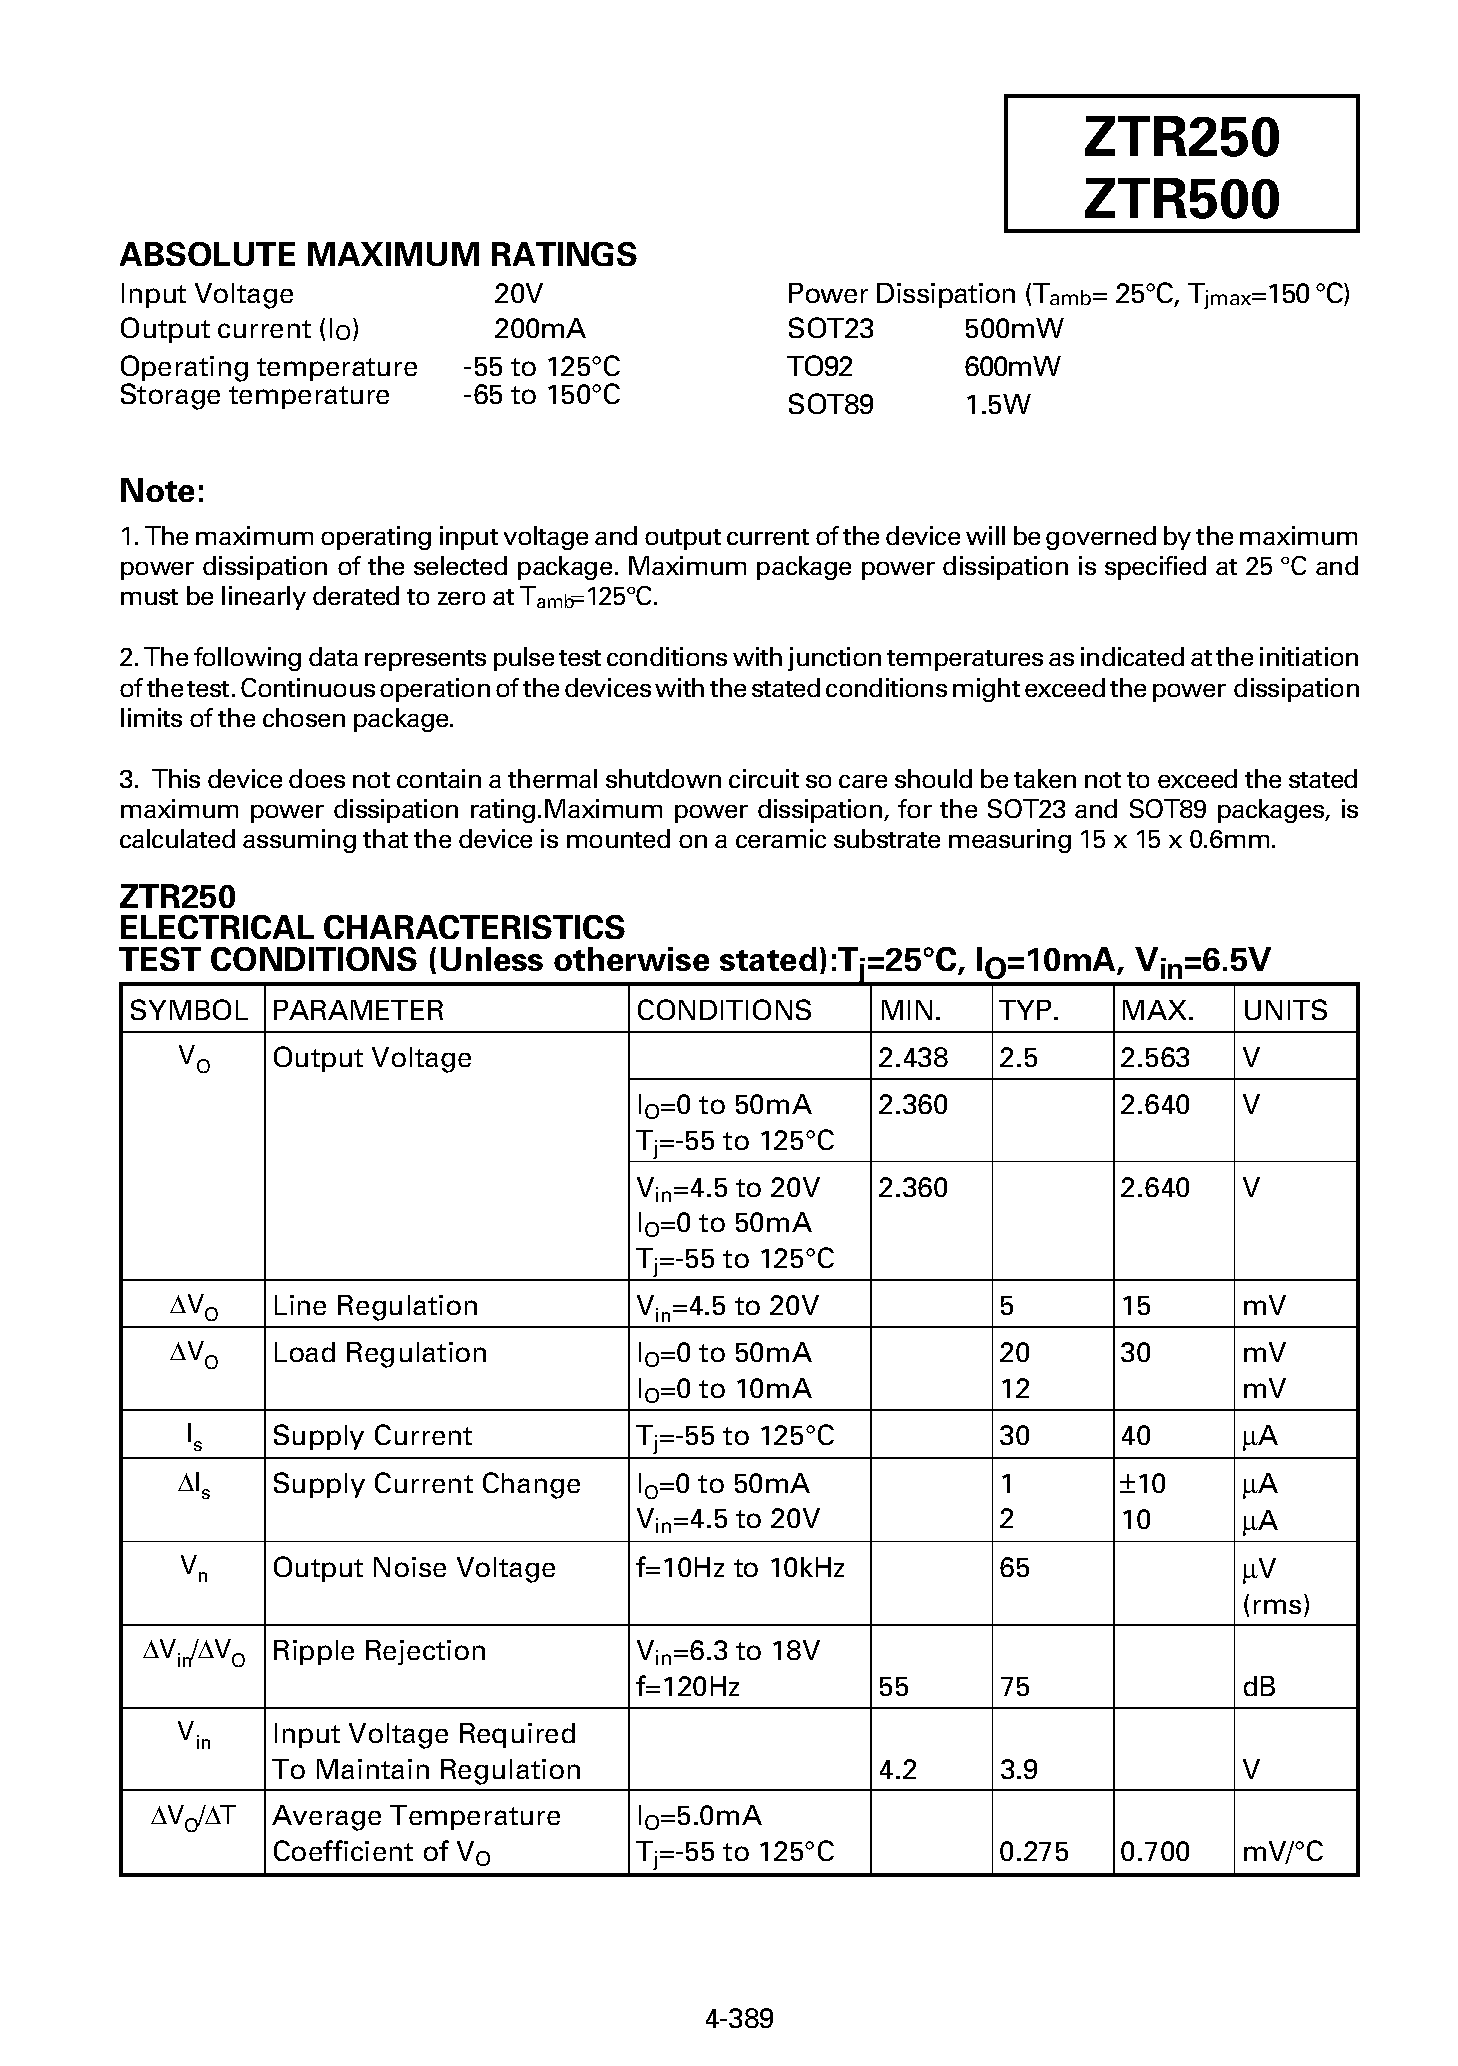 Datasheet ZTR250 - (ZTR250 / ZTR500) FIXED 2.5 AND 5 VOLT 3-TERMINAL VOLTAGE REFERENCES page 2